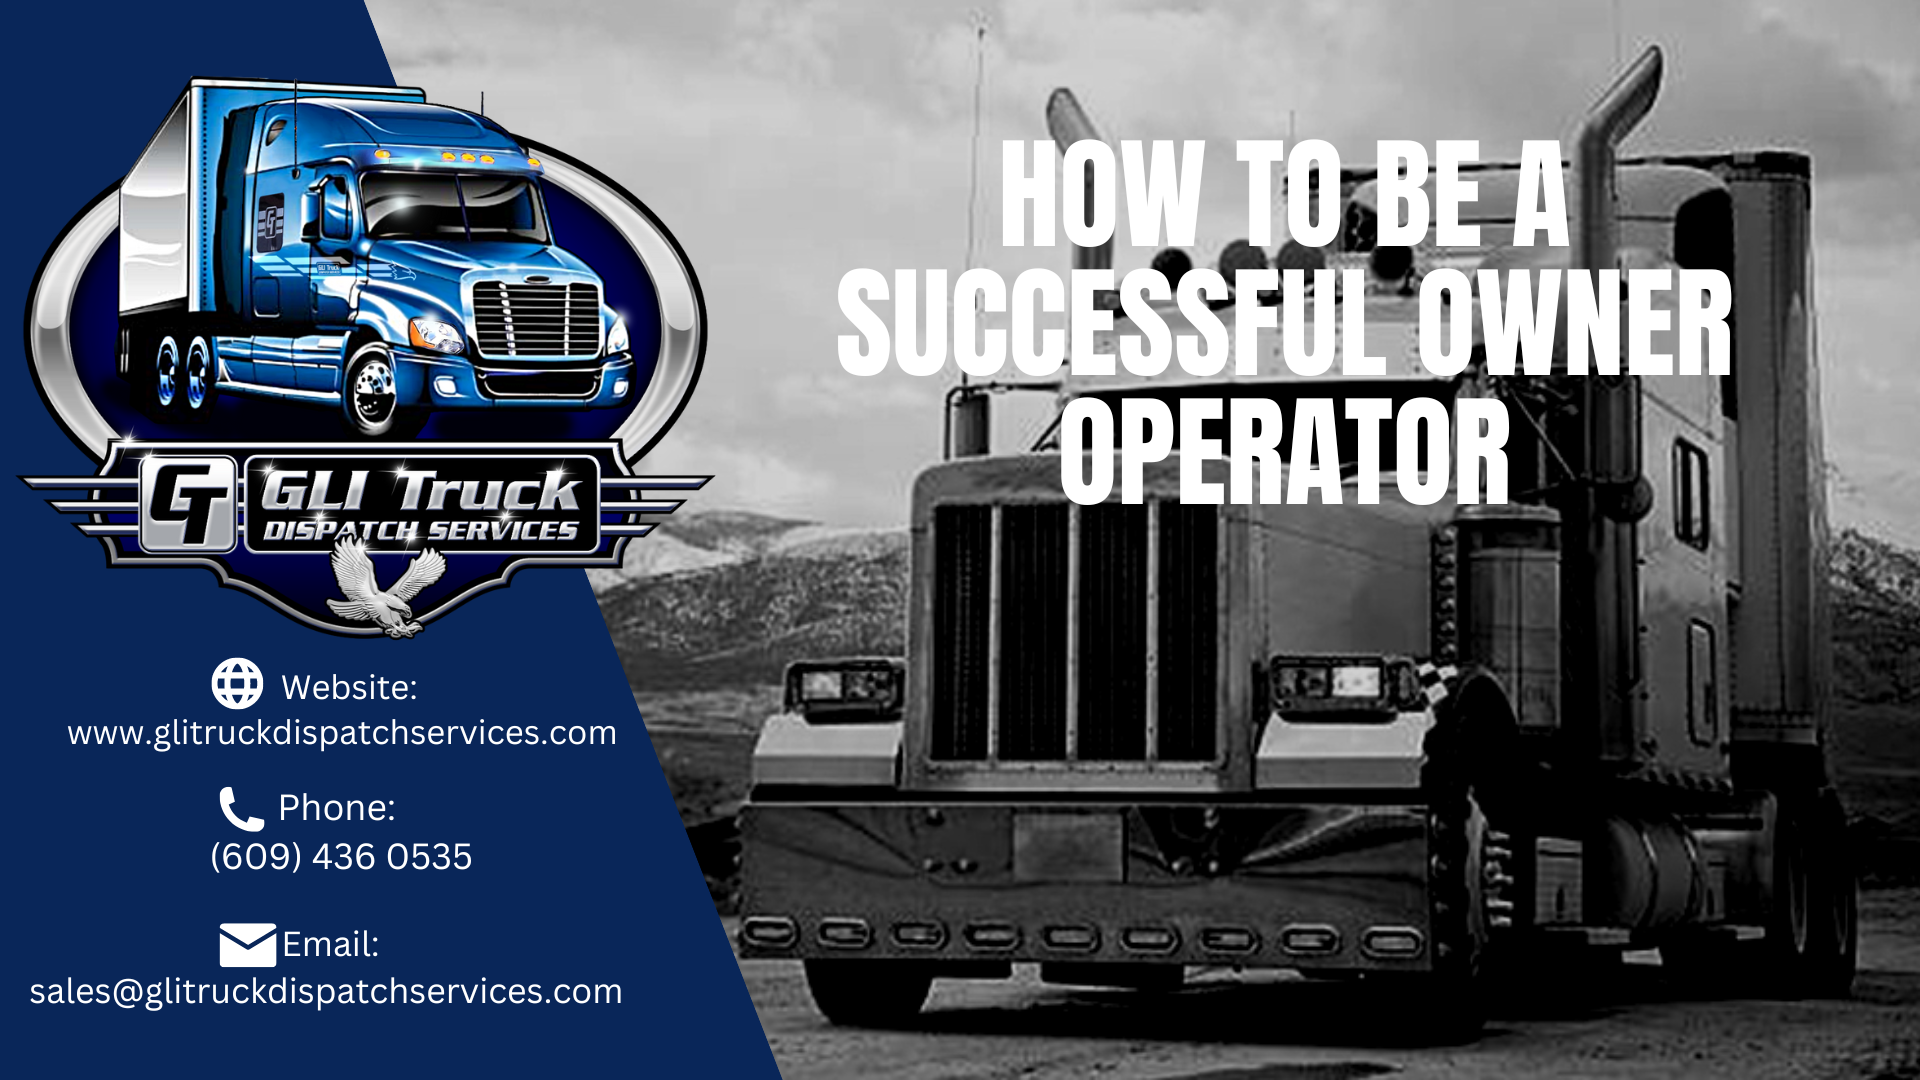 How to be a Successful Owner Operator